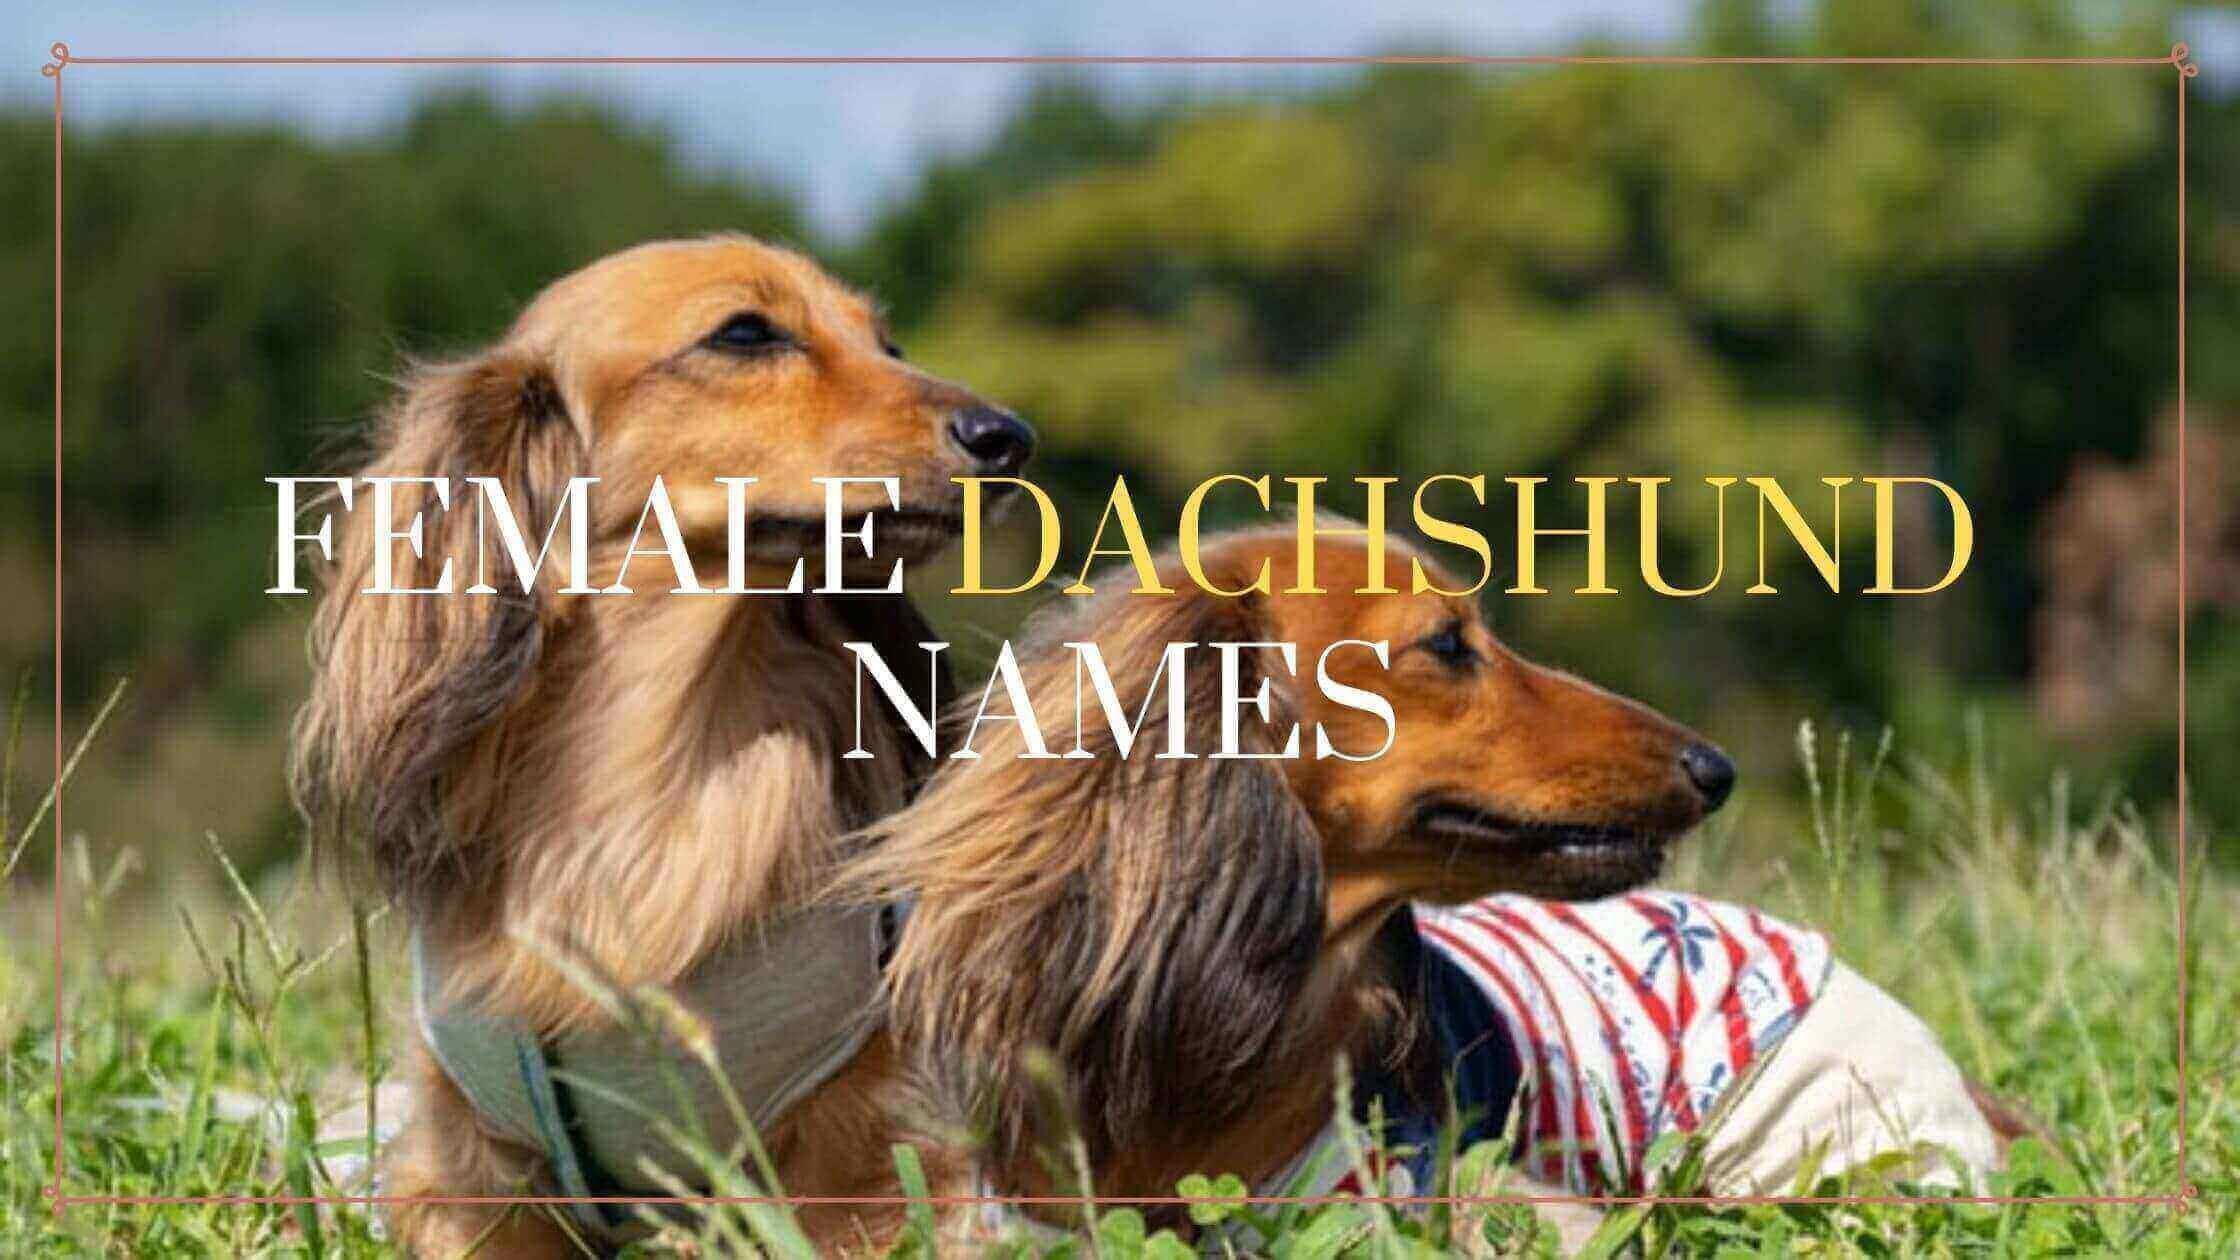 220 Best Female Dachshund Names - Our Complete Guide in 2023